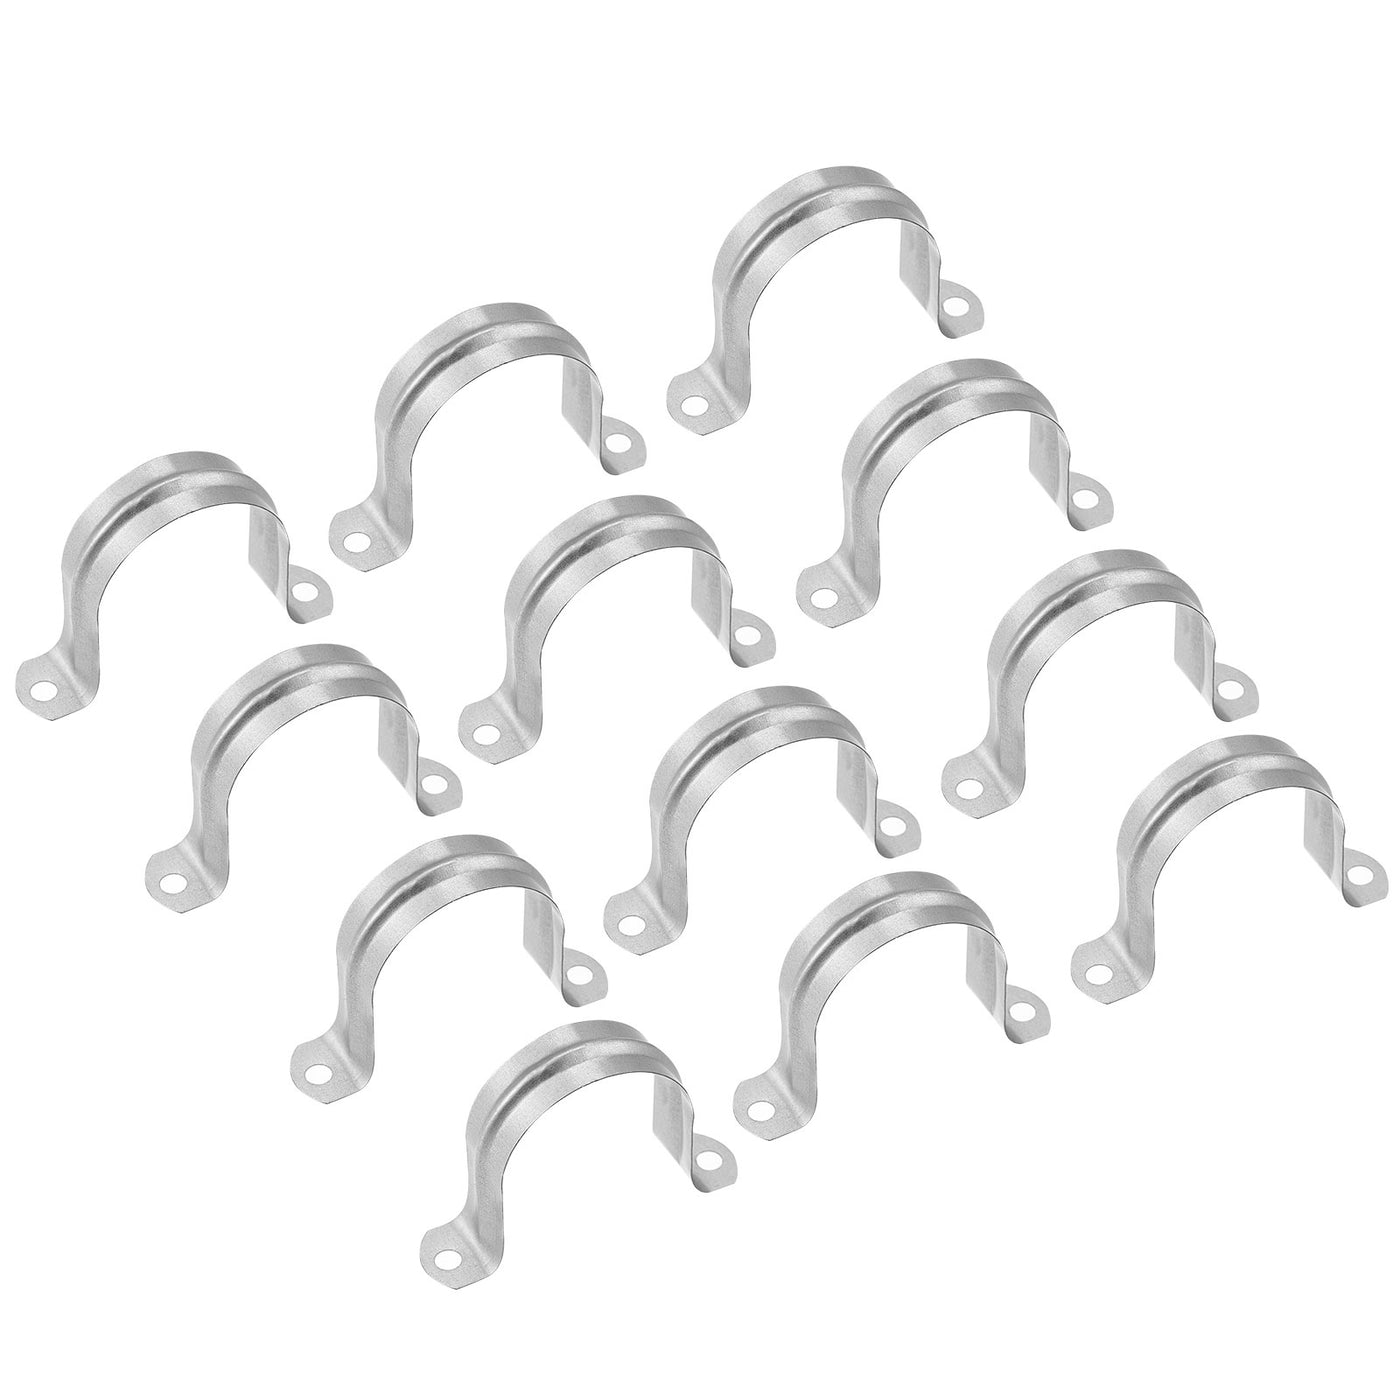 uxcell Uxcell Rigid Pipe Strap, 1 5/8 Inch (40mm) 2 Holes U Bracket Carbon Steel Tension Tube Clip Clamp 12pcs